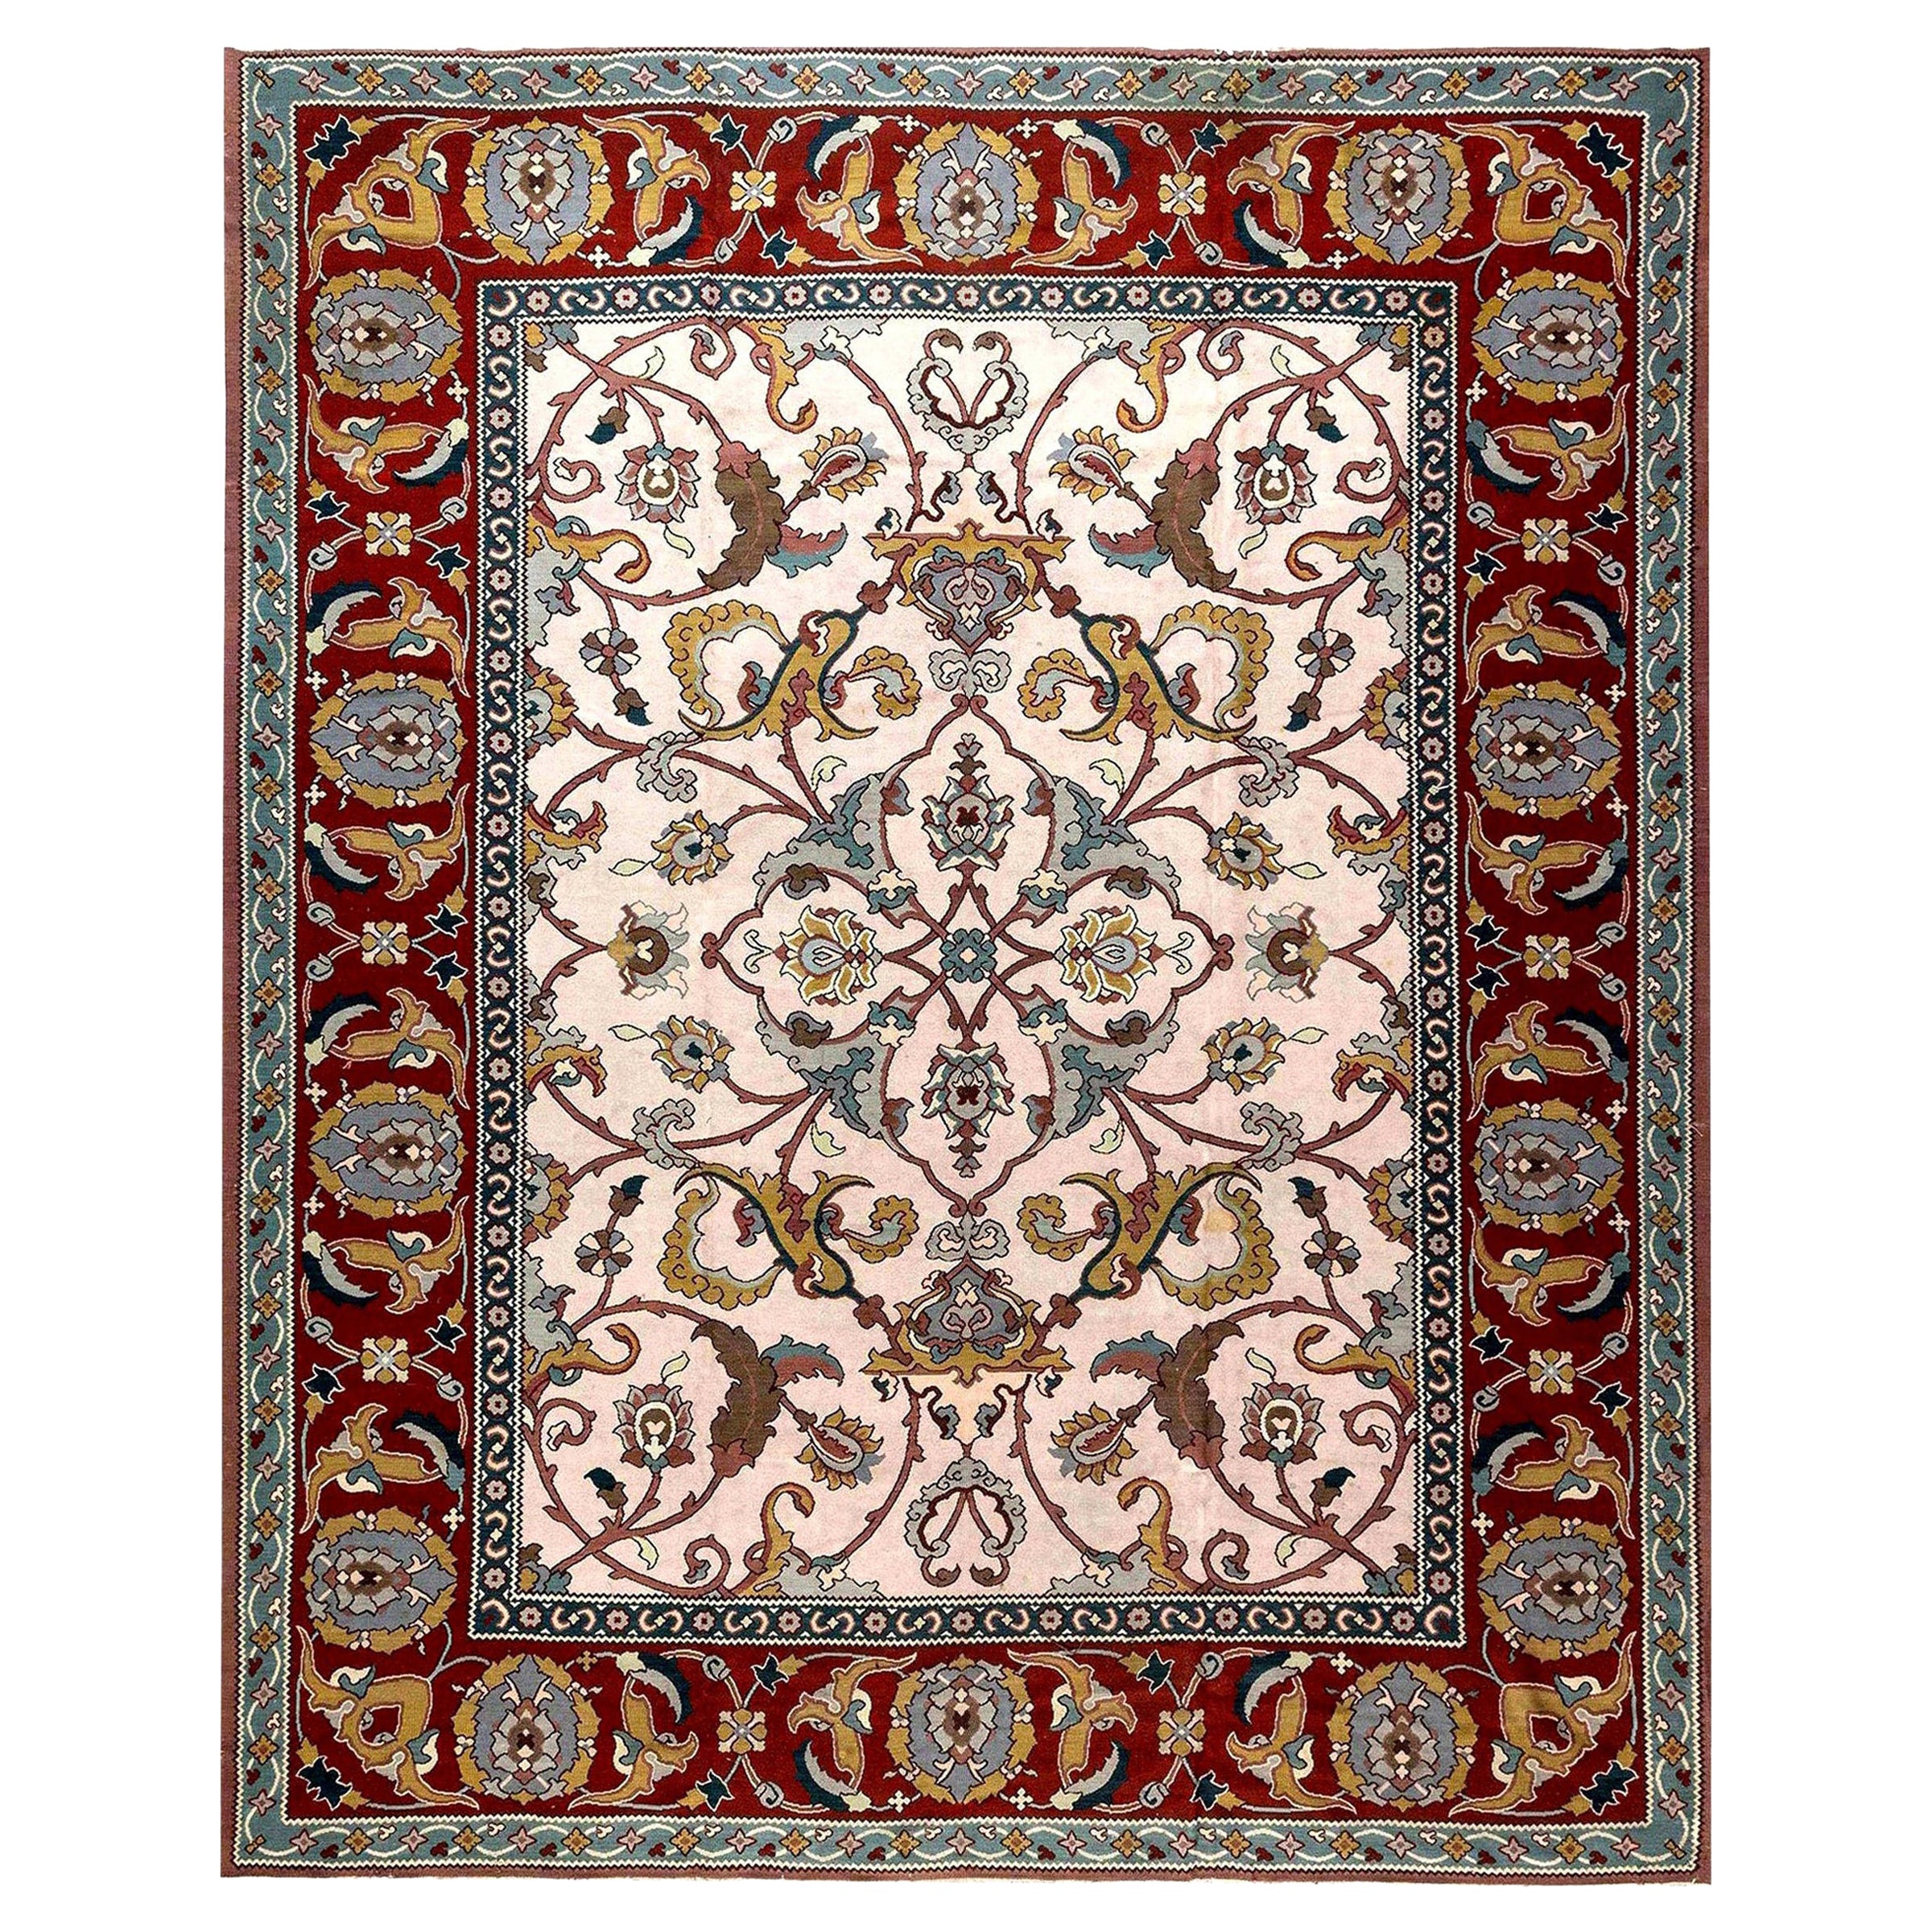 Contemporary Traditional Floral Design Flat-Weave Wool Rug by Doris Leslie Blau For Sale